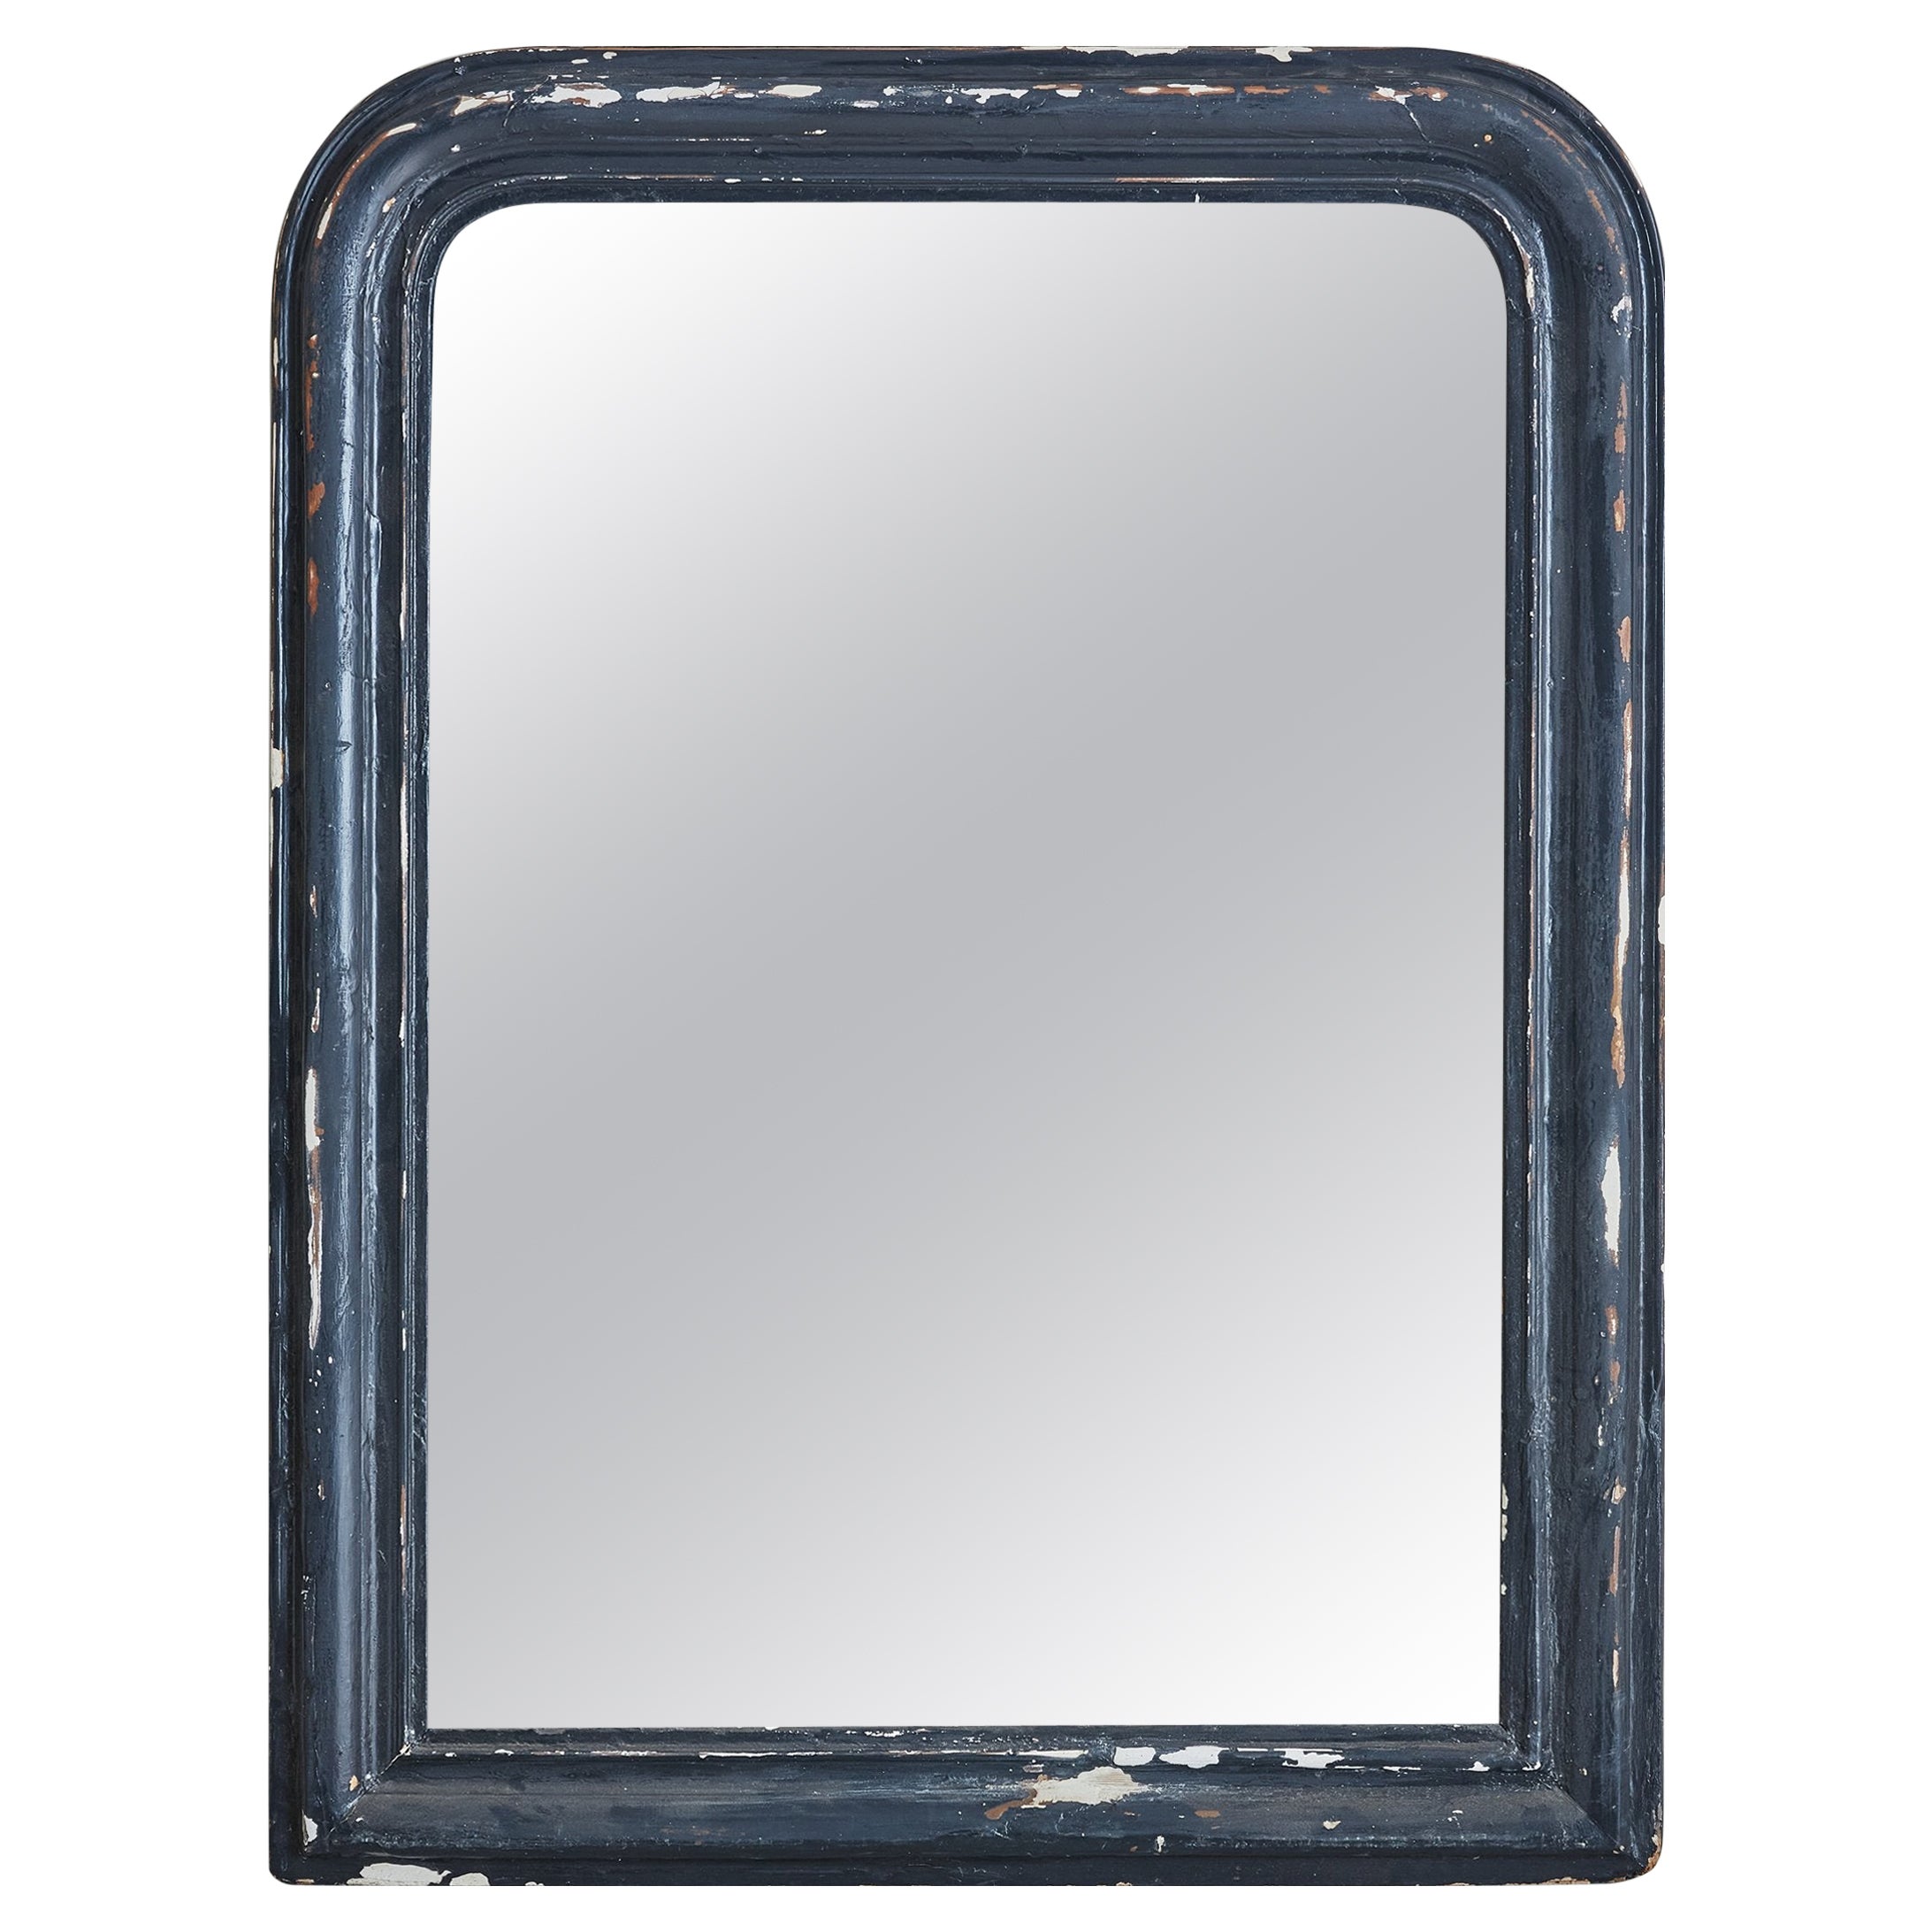 Antique French Black Wood Frame Mirror, Early 1900s